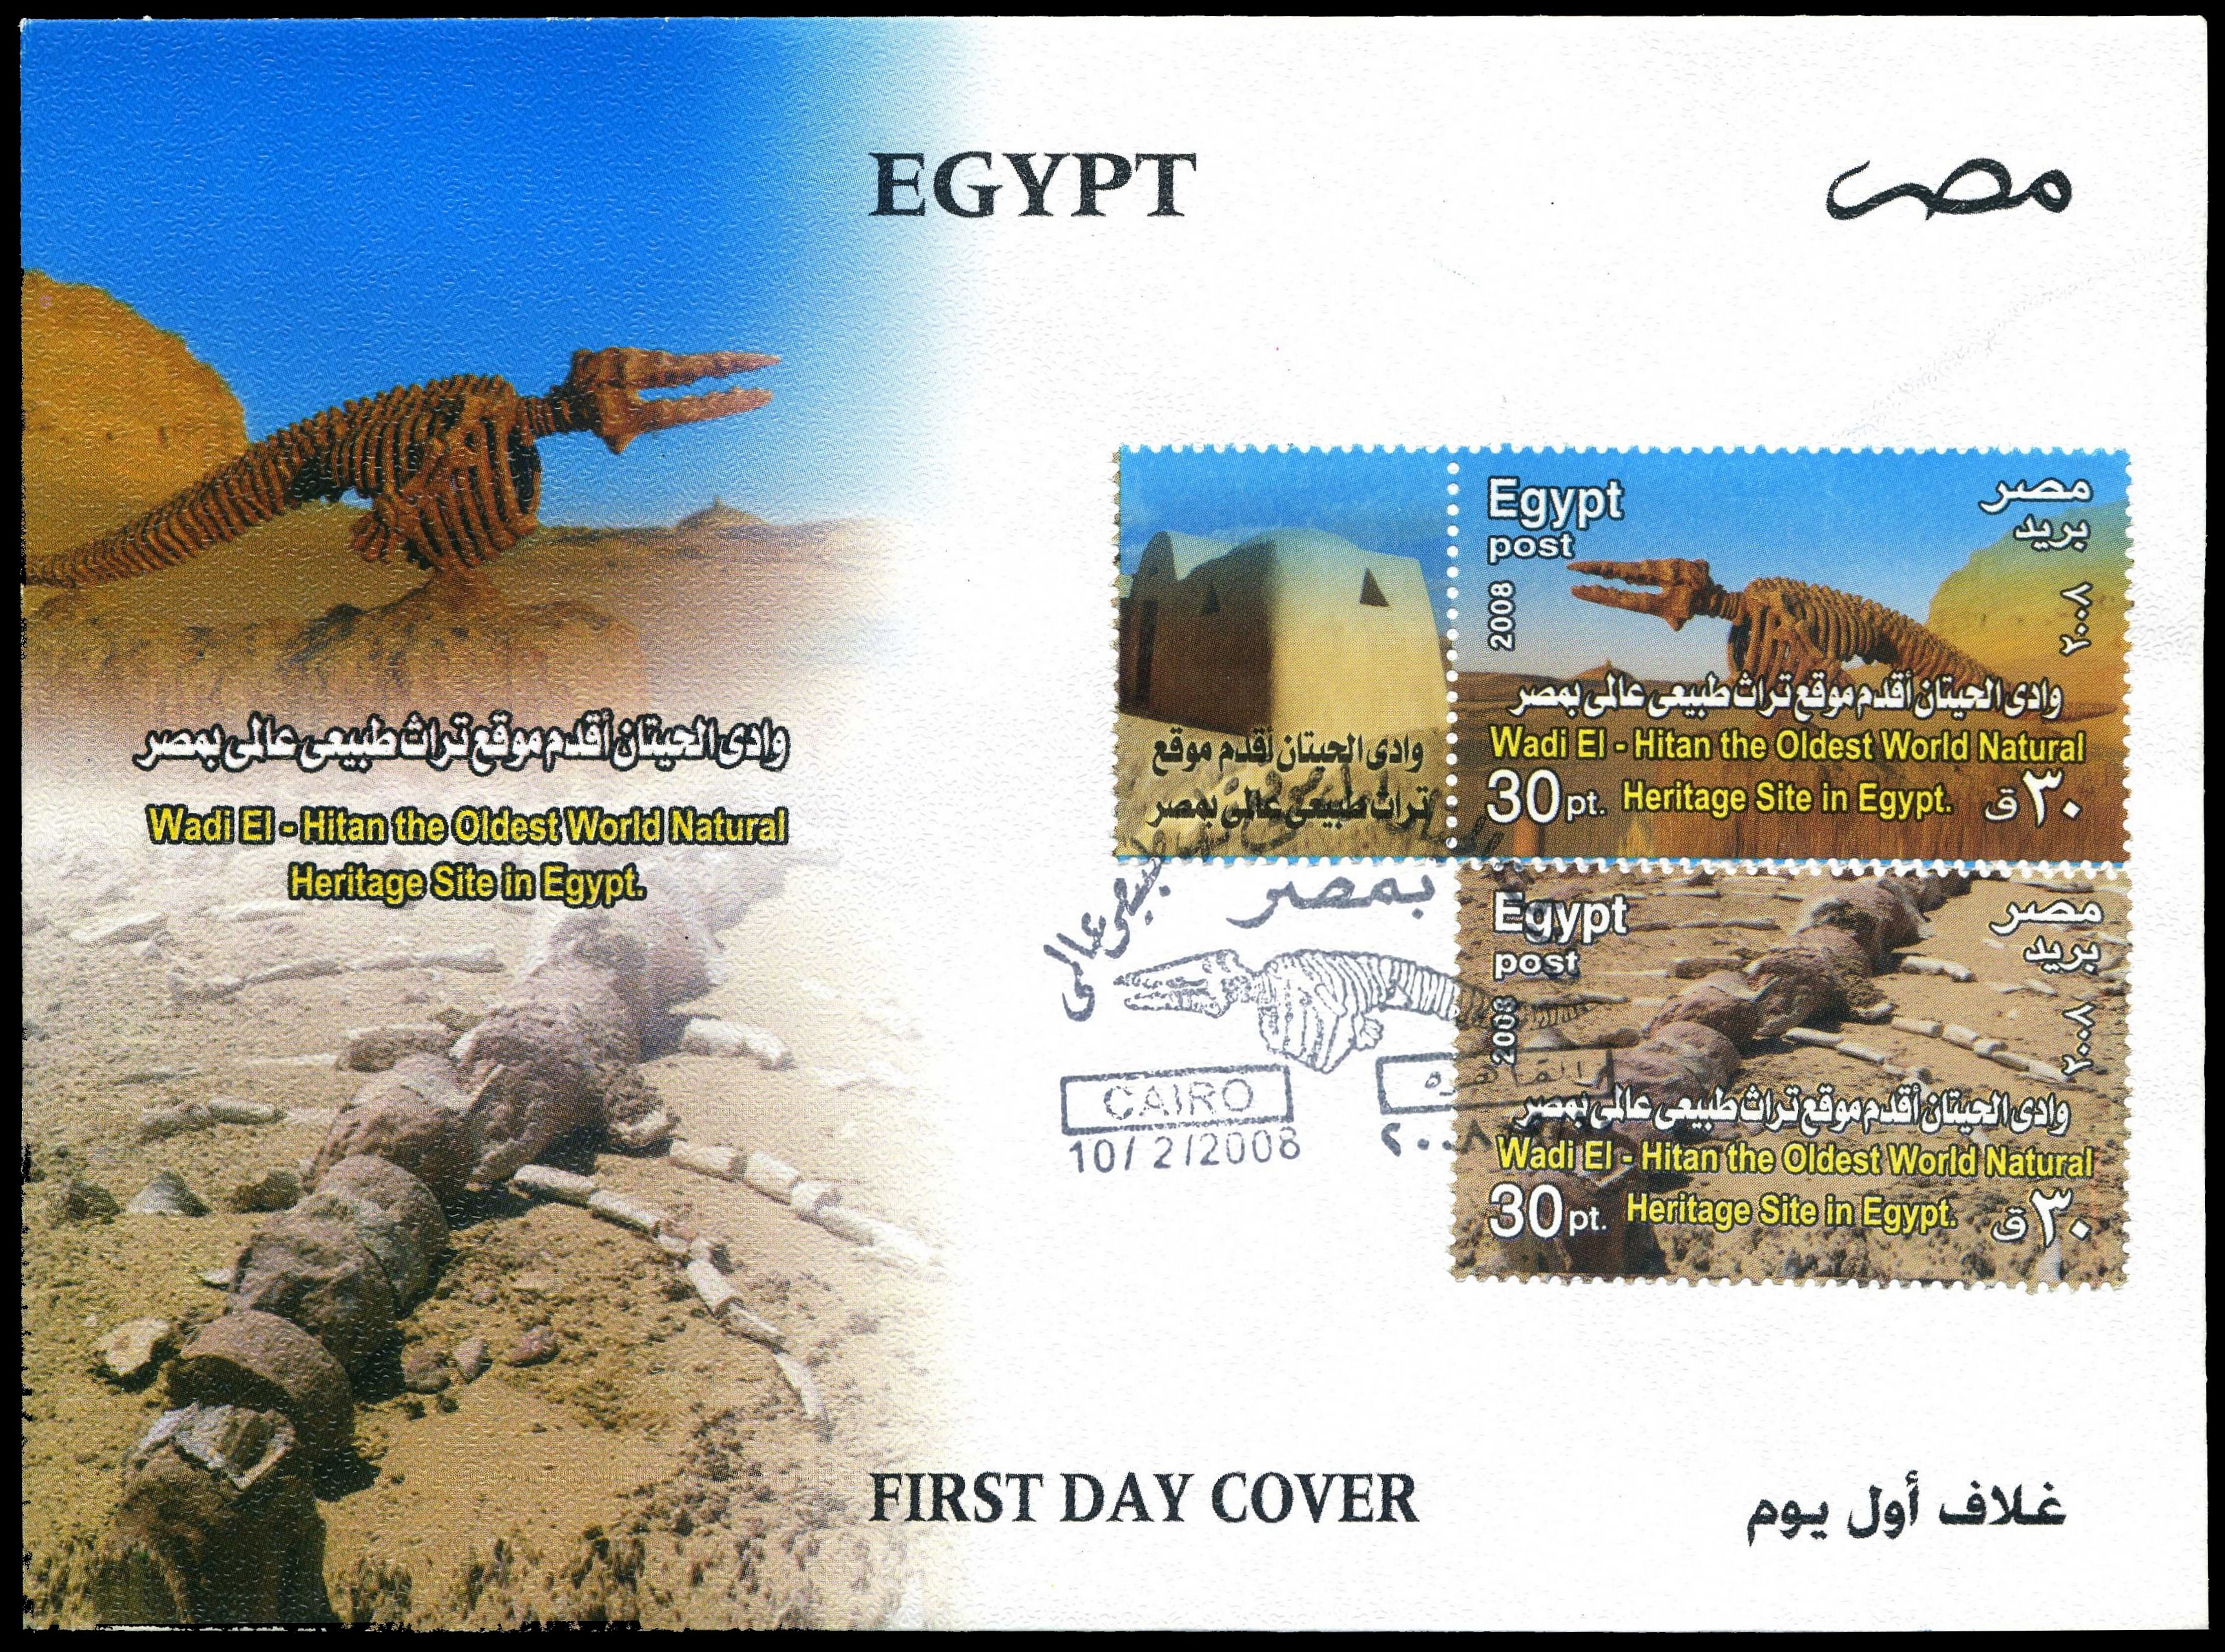 Prehistoric whale fossils on FDC of Egypt